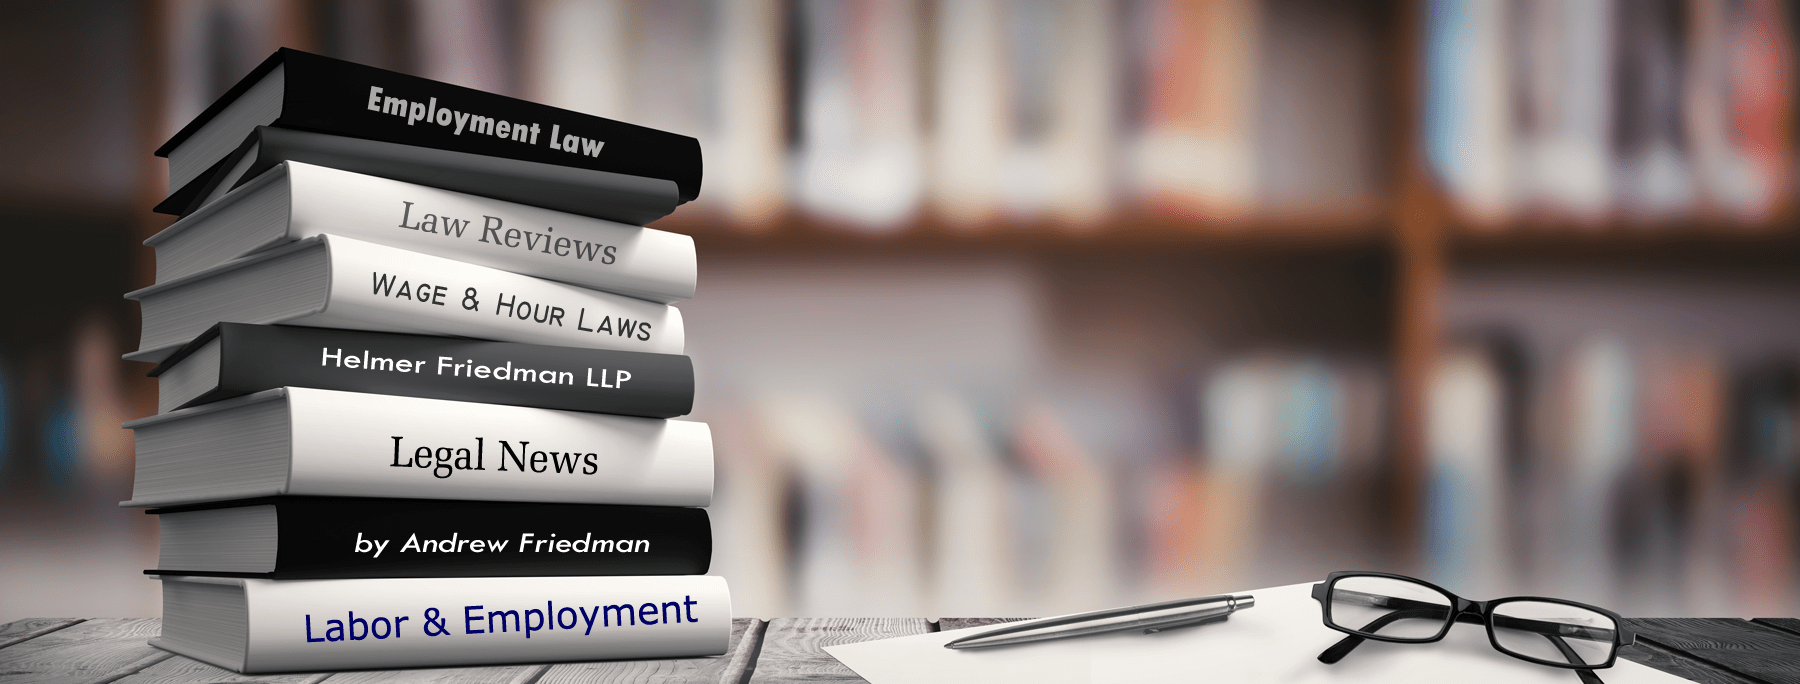 Review Employment Law